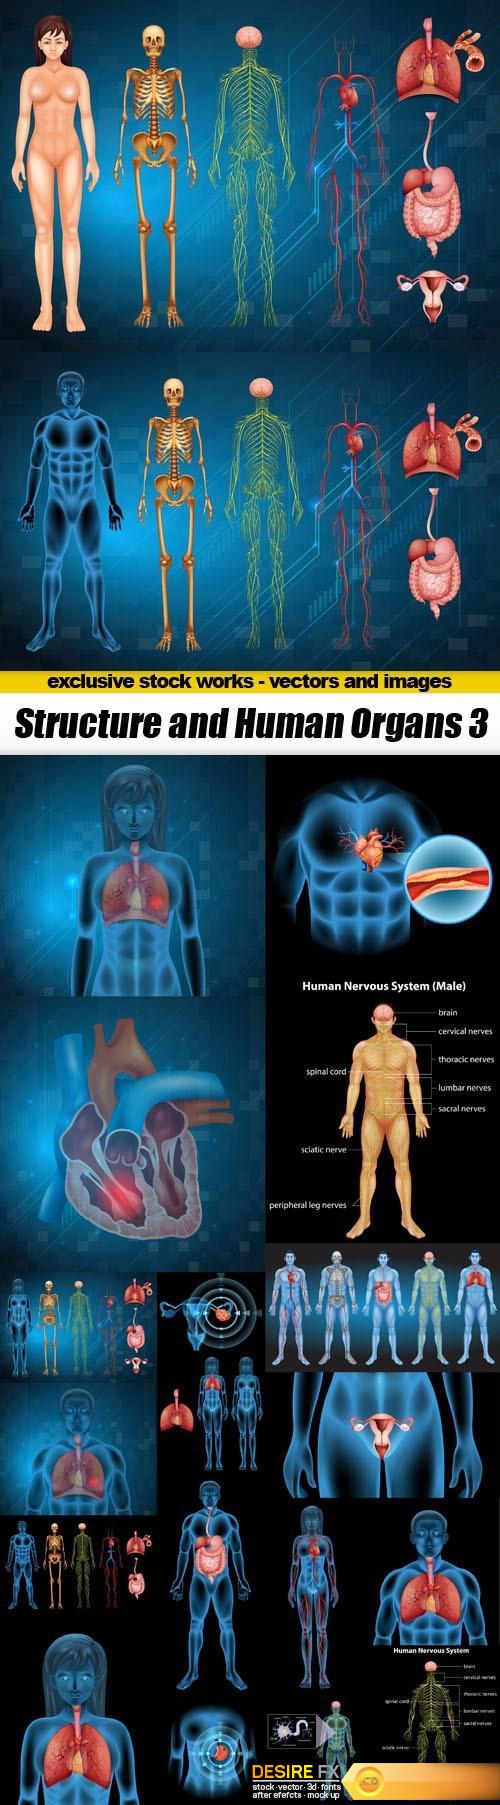 Structure and Human Organs 3 - 20 EPS